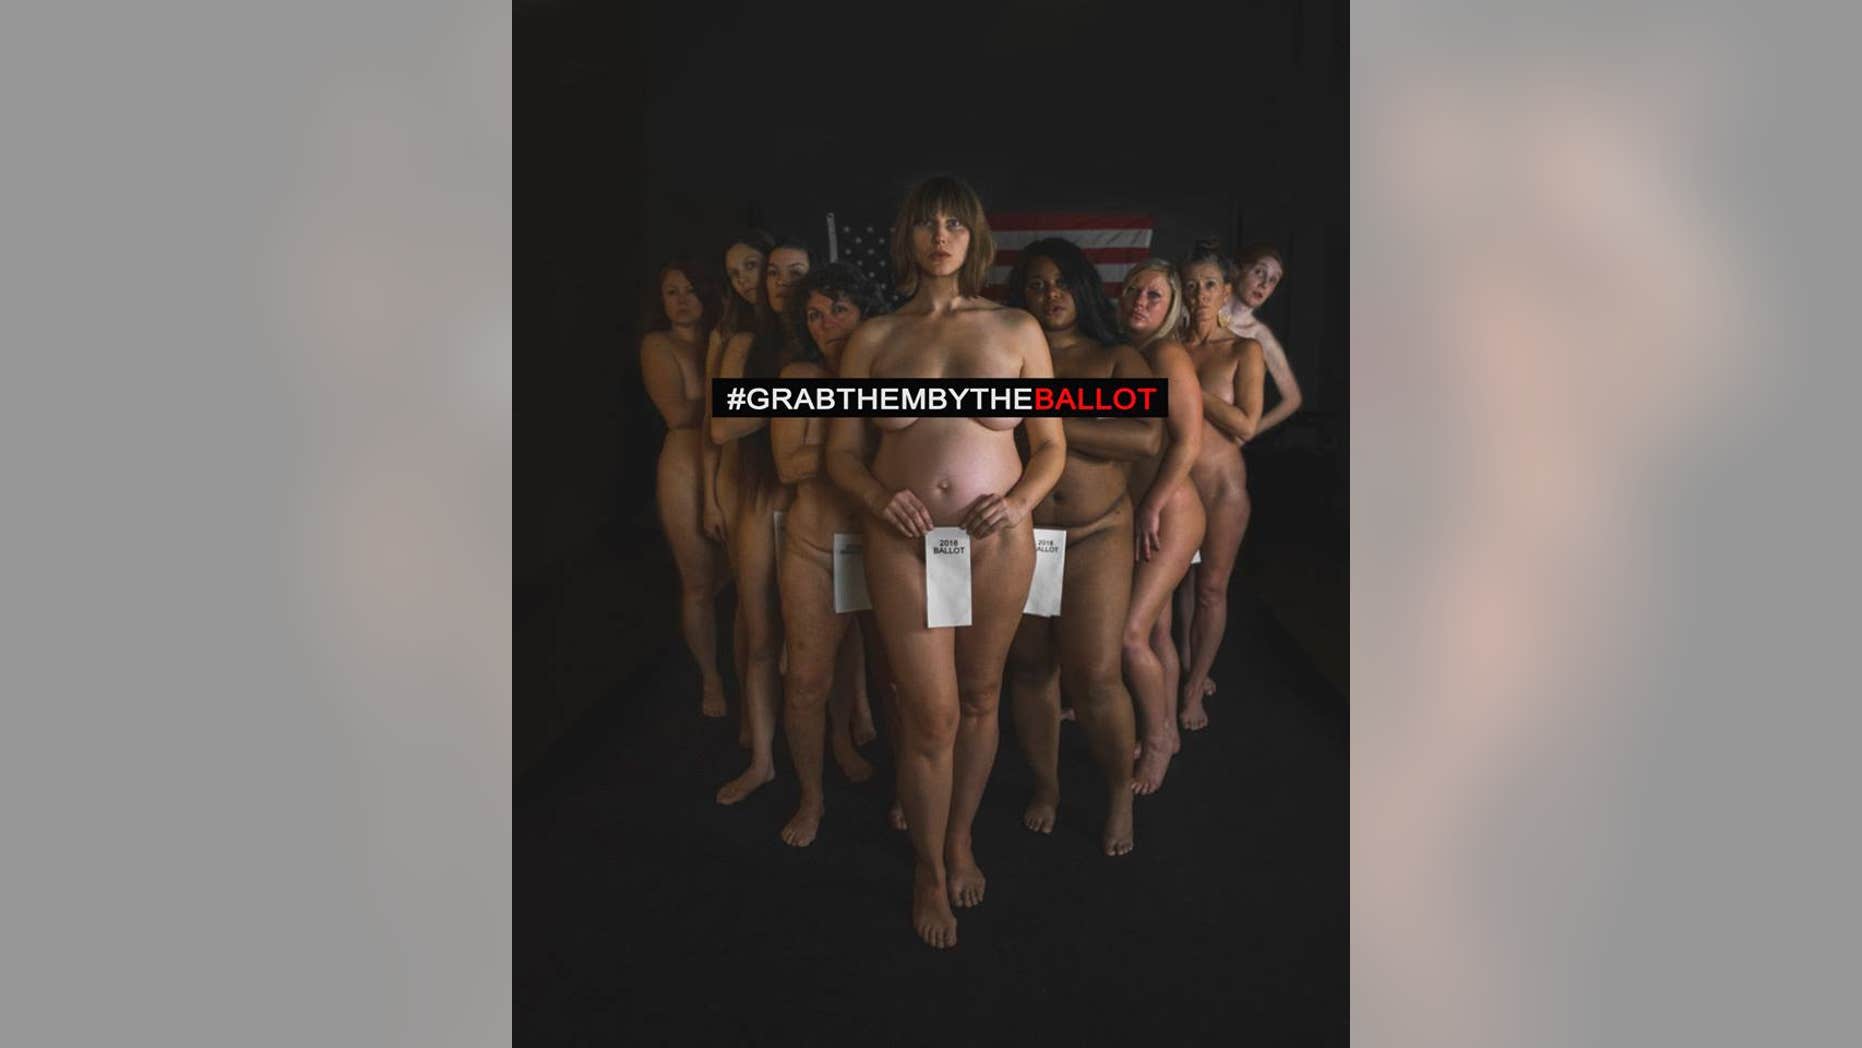 Women pose naked in 'Grab Them By The Ballot' photo shoot to ...